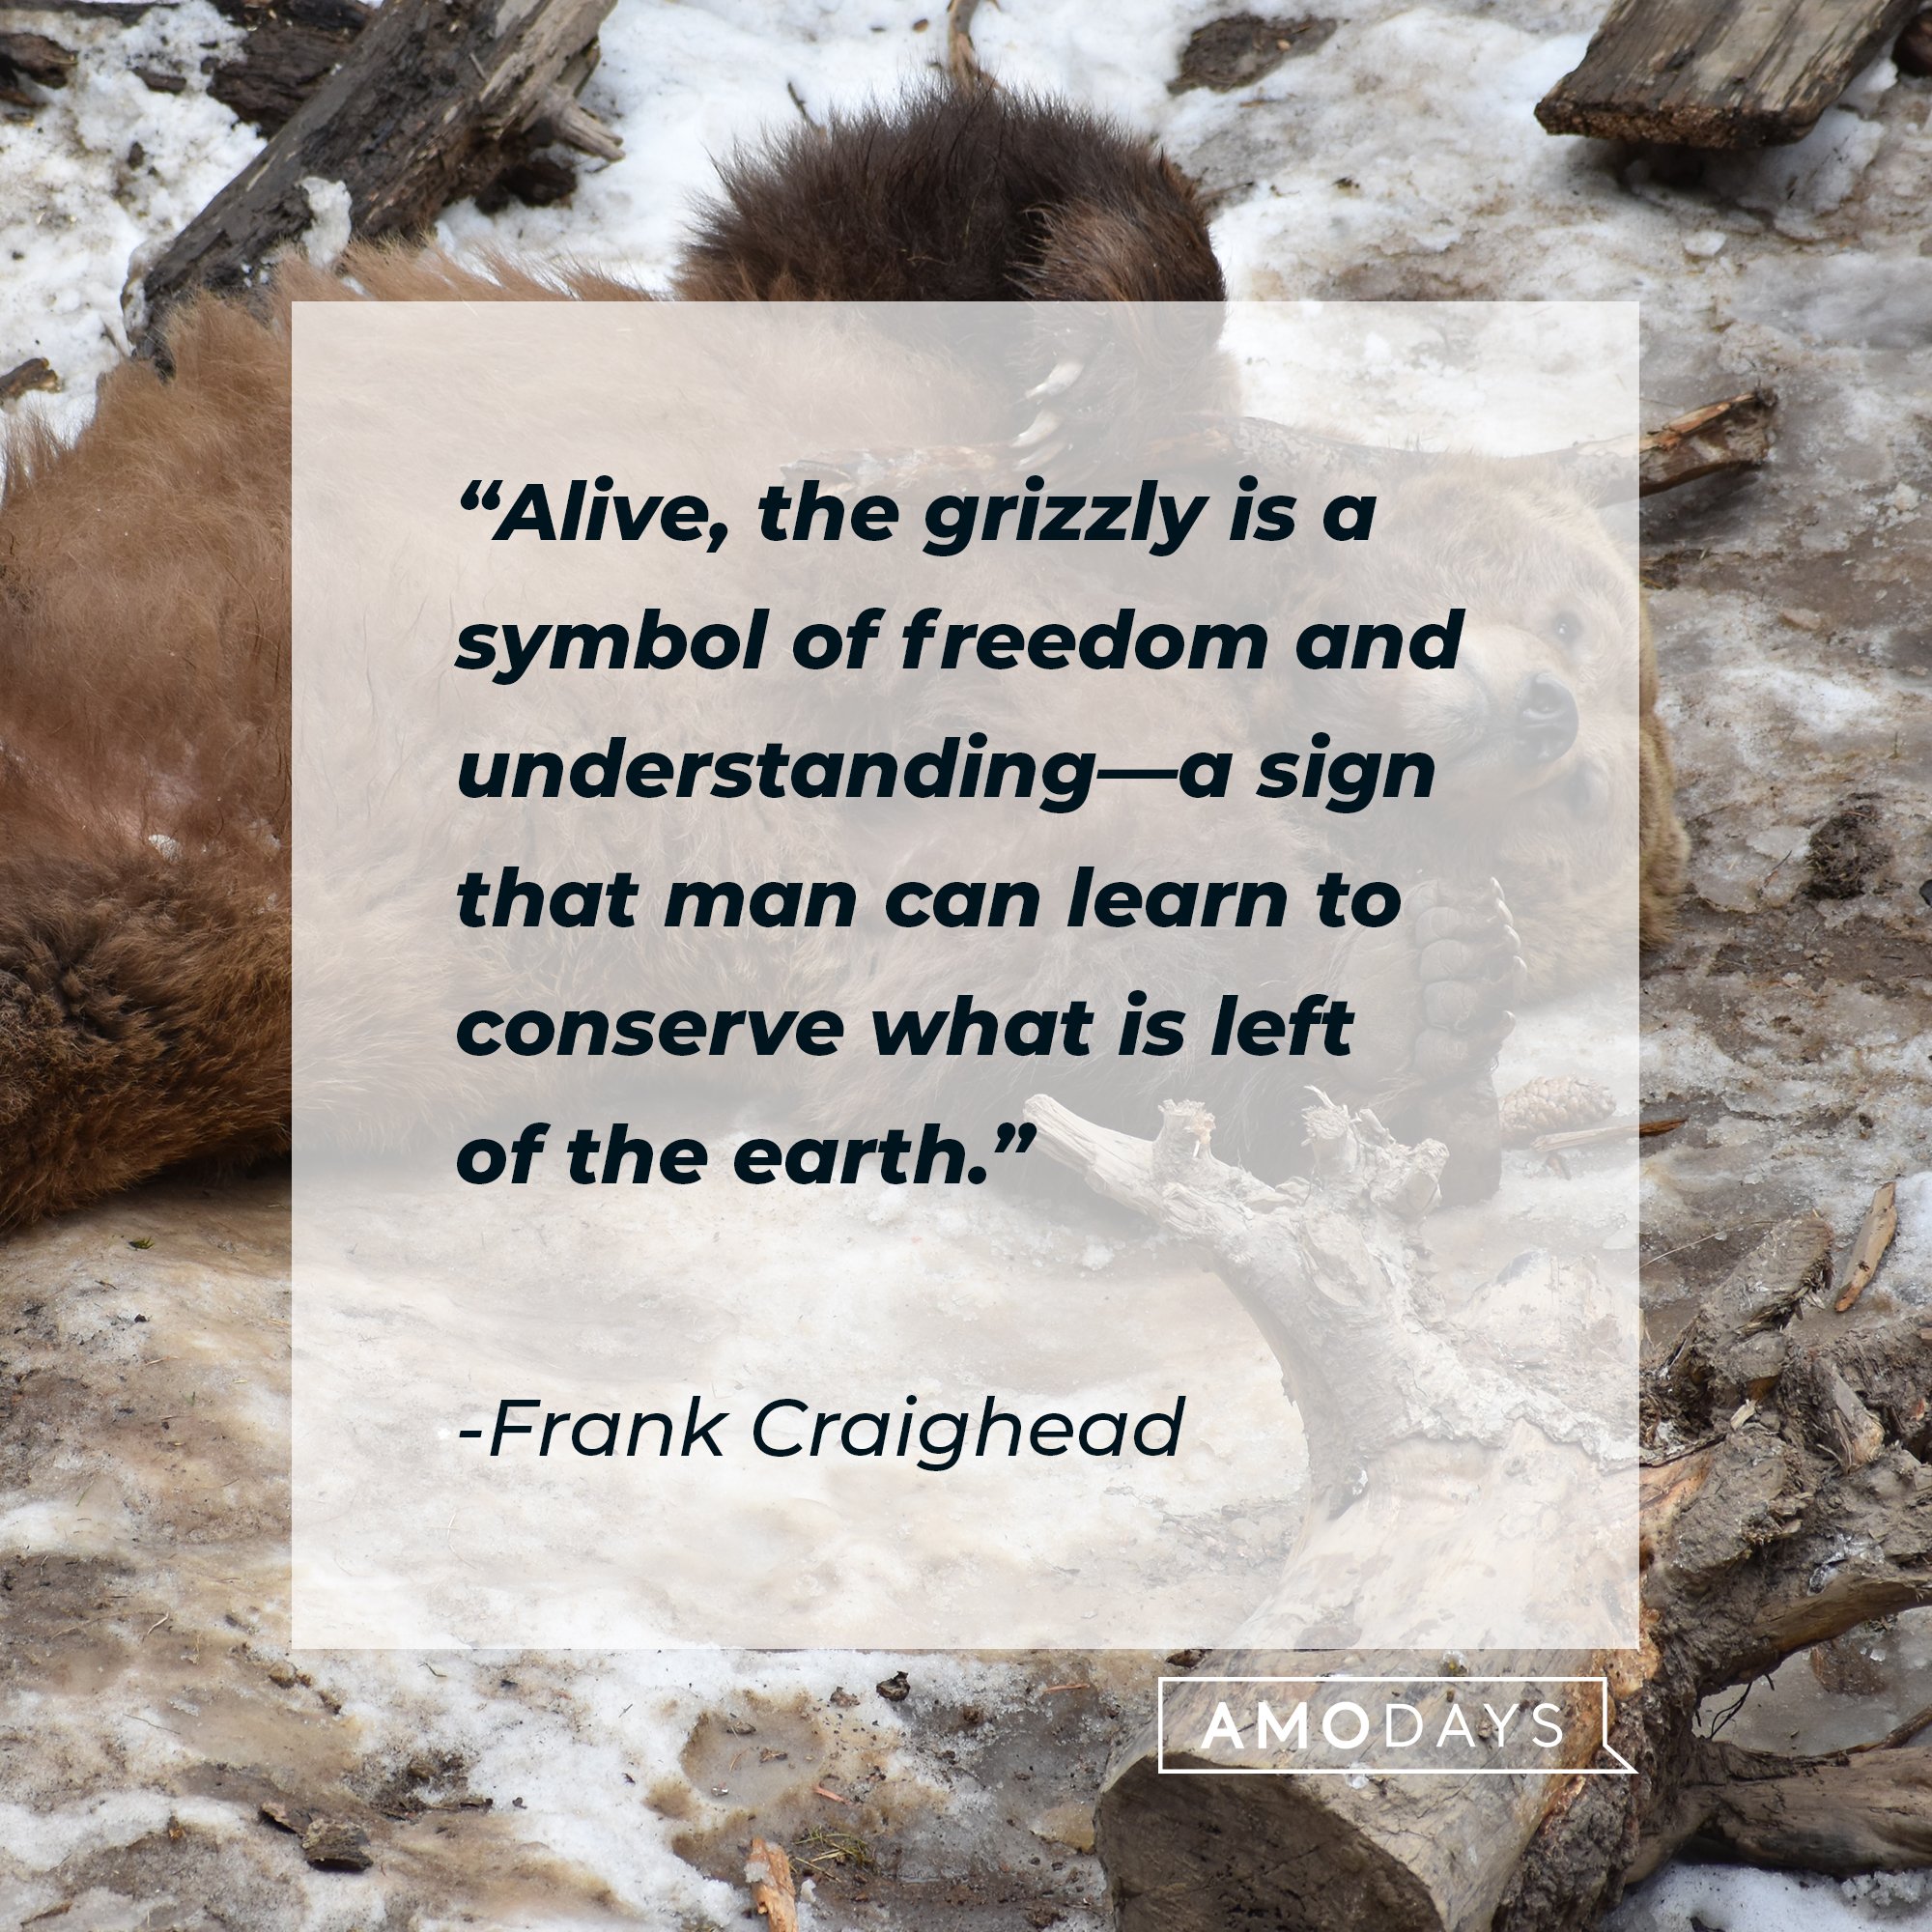 Frank Craighead’s quote: "Alive, the grizzly is a symbol of freedom and understanding—a sign that man can learn to conserve what is left of the earth." | Image: AmoDays